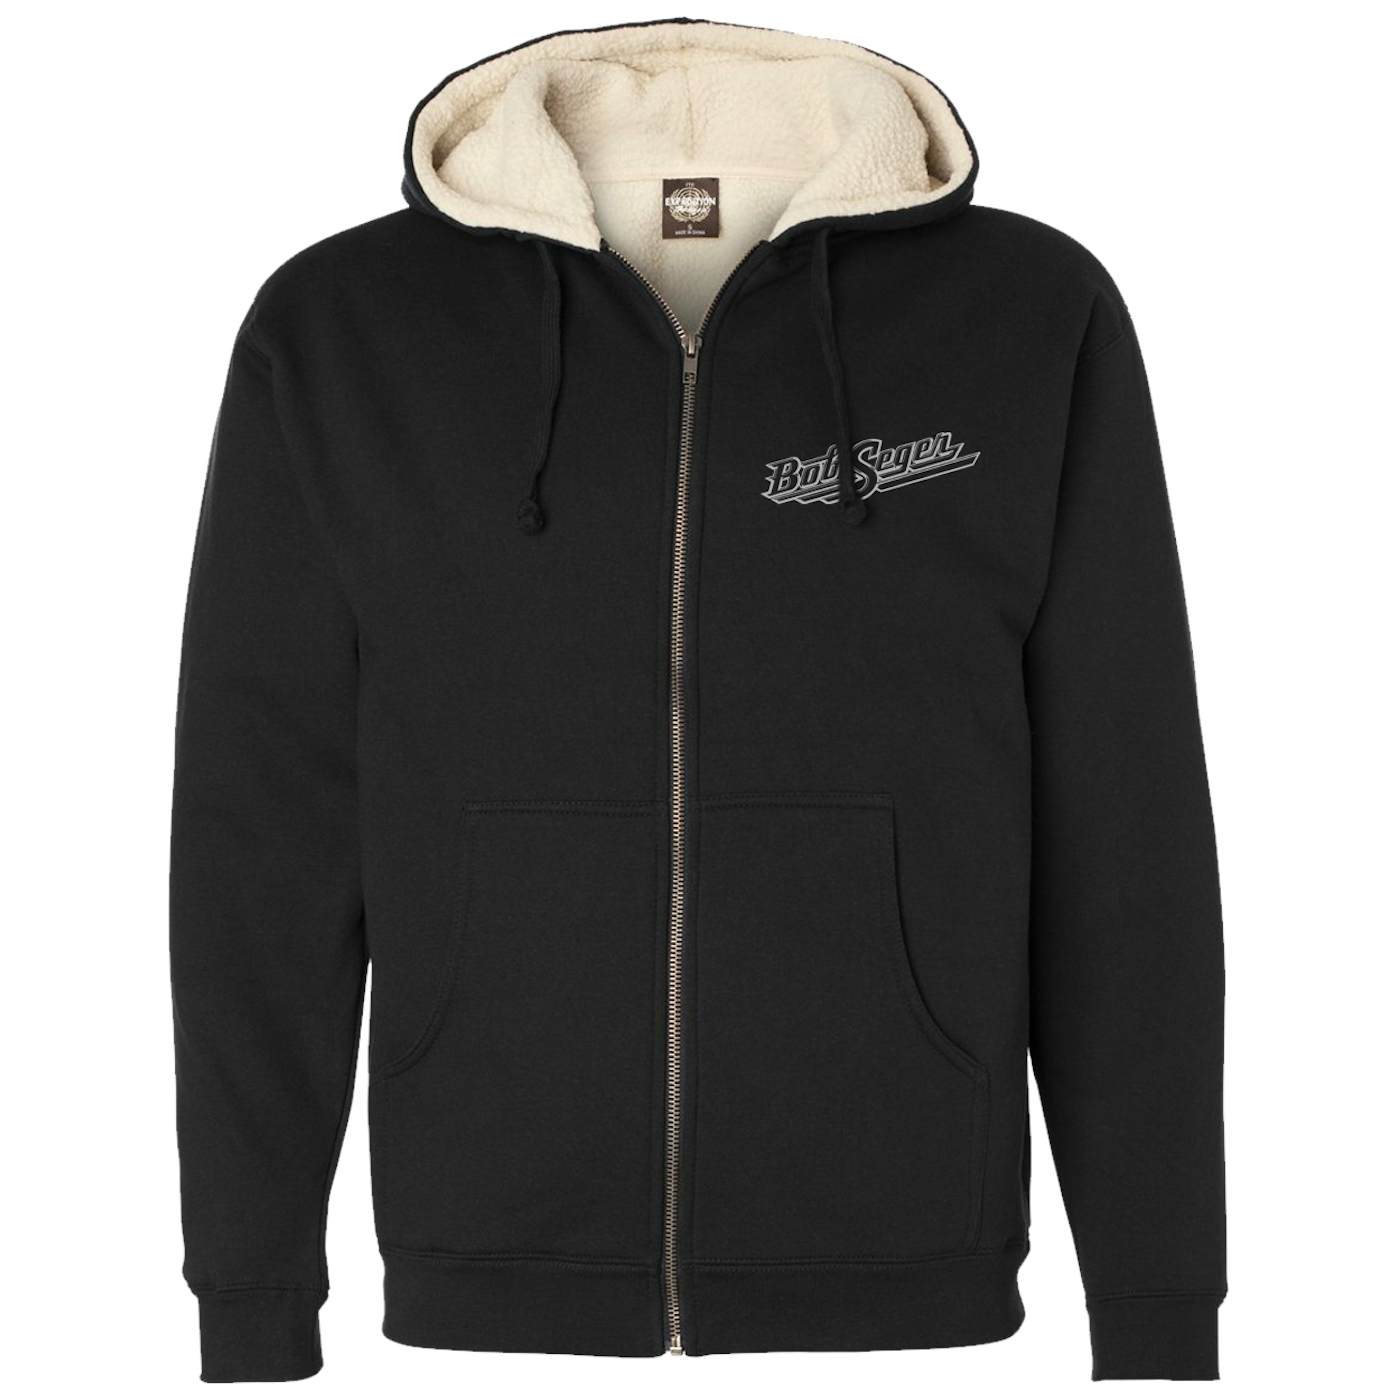 Bob Seger & The Silver Bullet Band Old Time Rock and Roll Sherpa Zip Hoodie